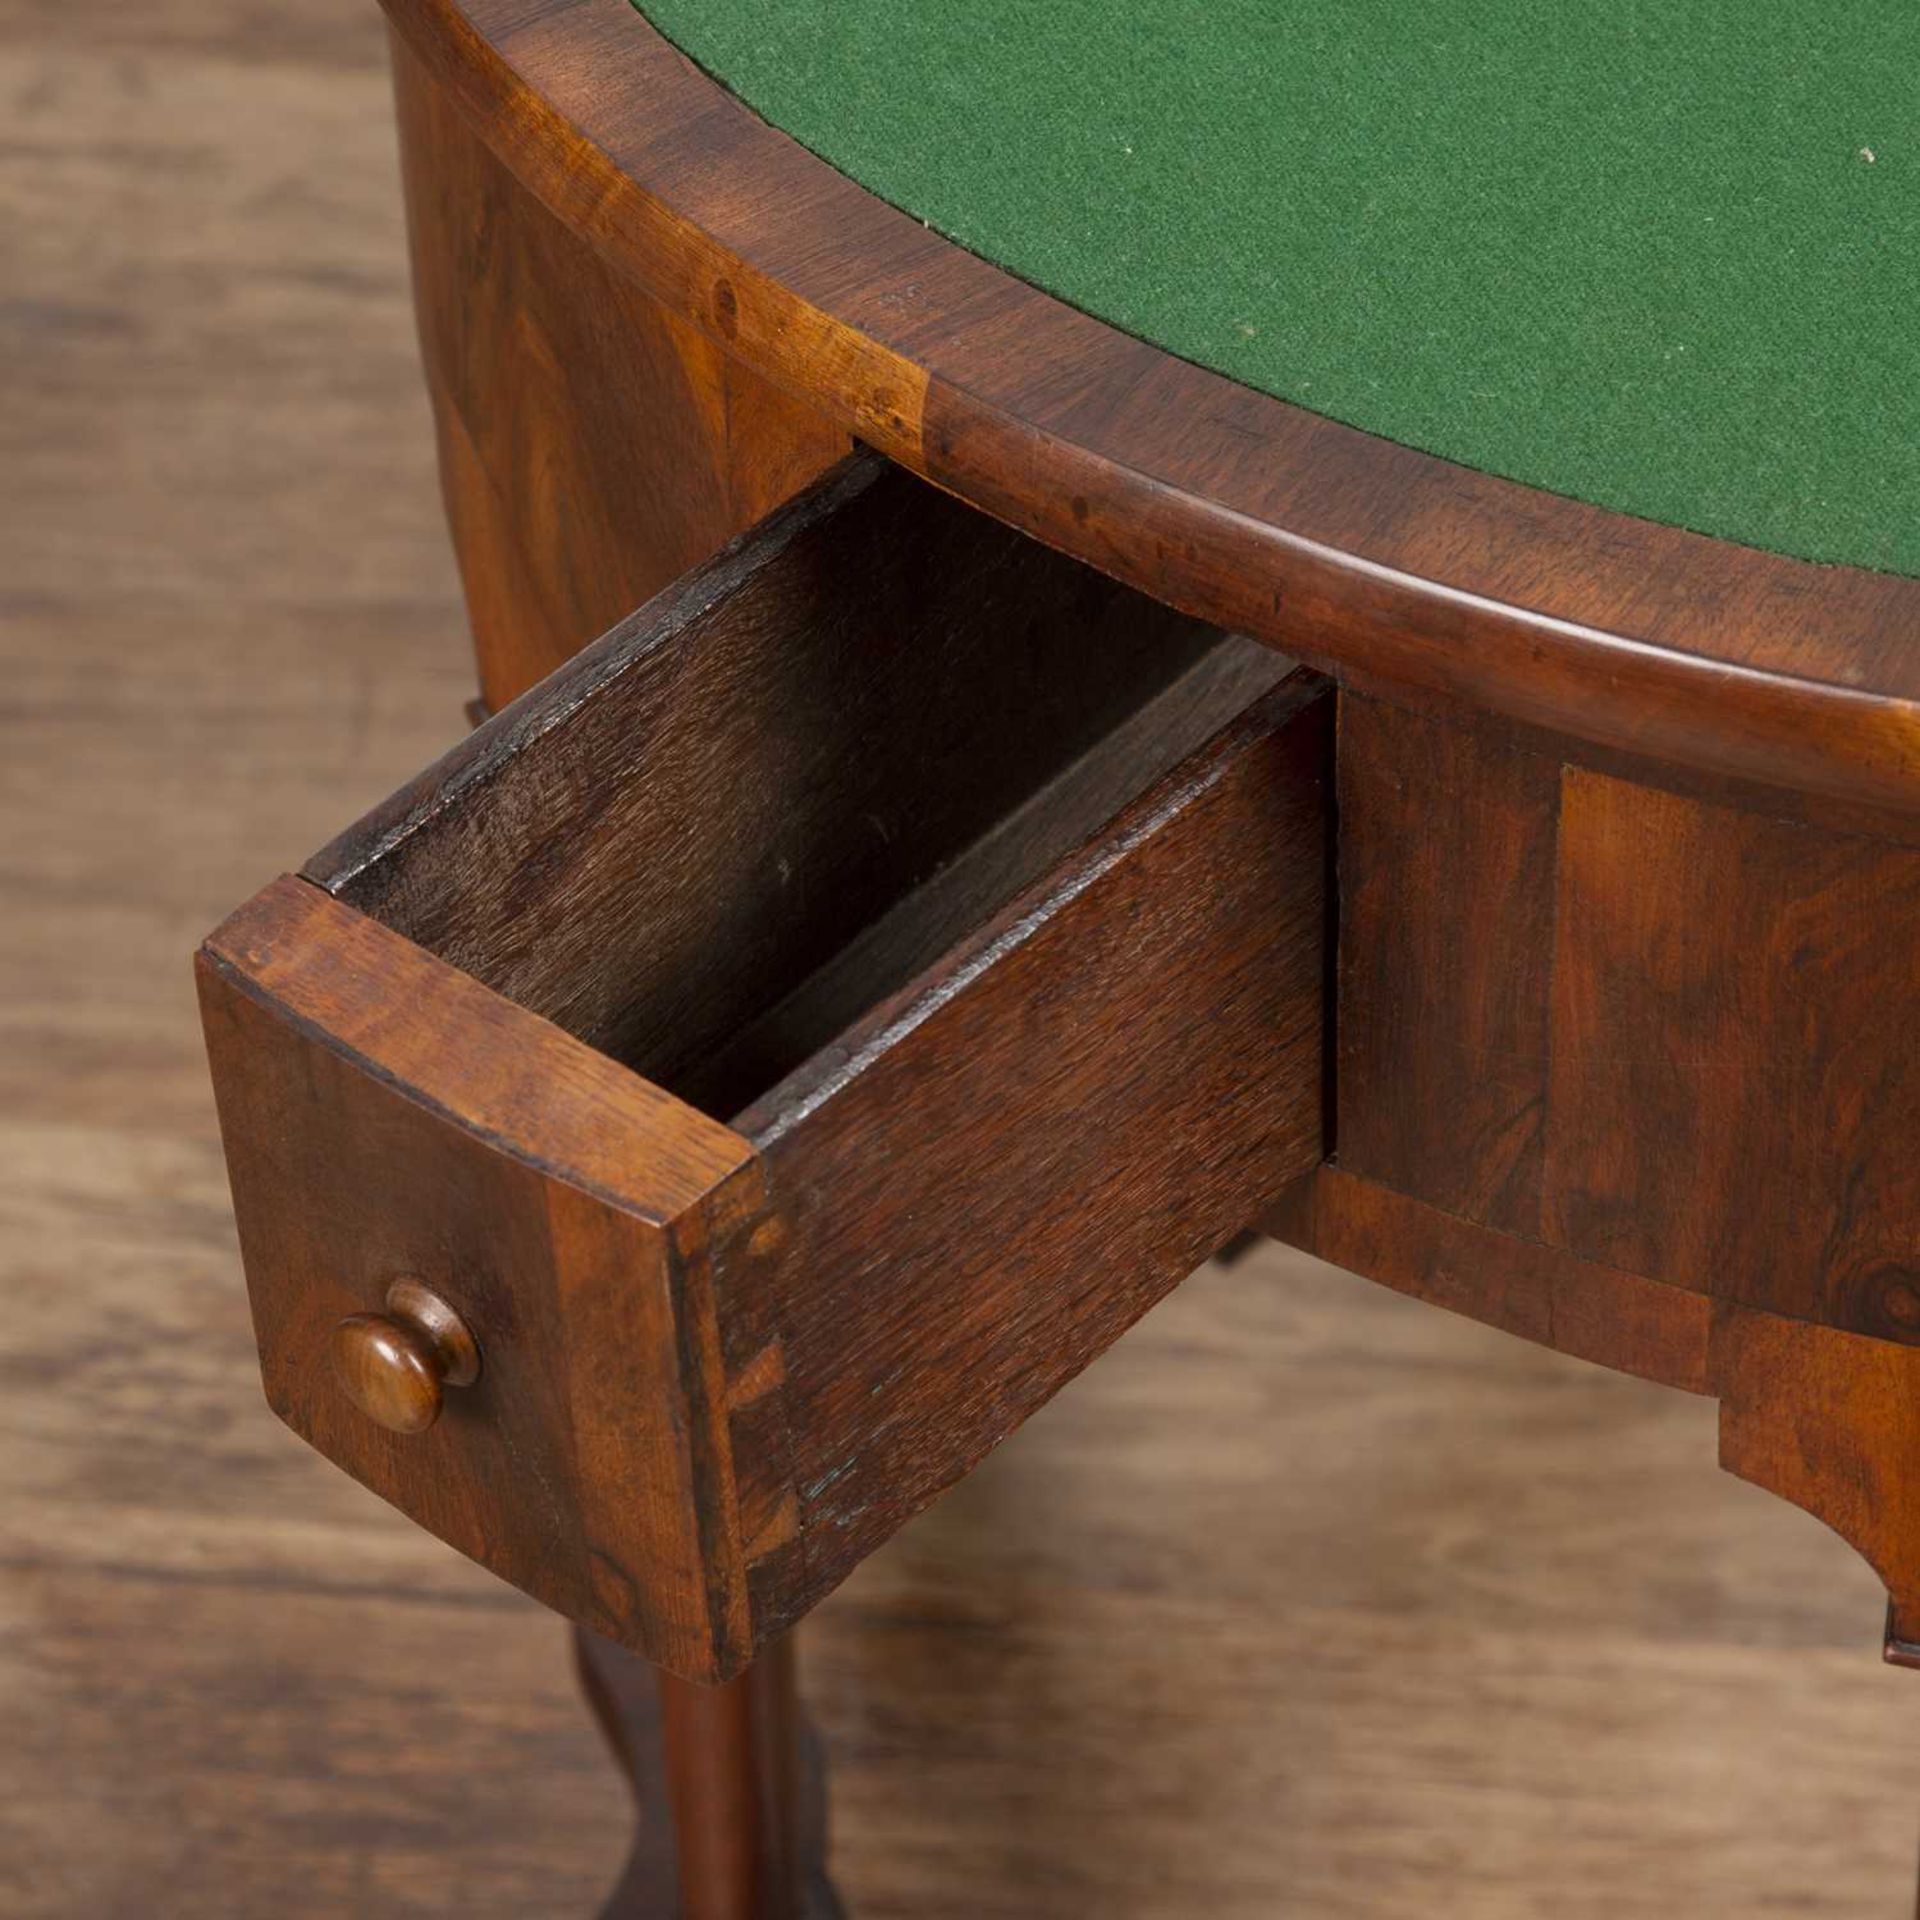 Quarter veneered walnut demi-lune card table Queen Anne style with inset baize on turned support and - Image 4 of 6